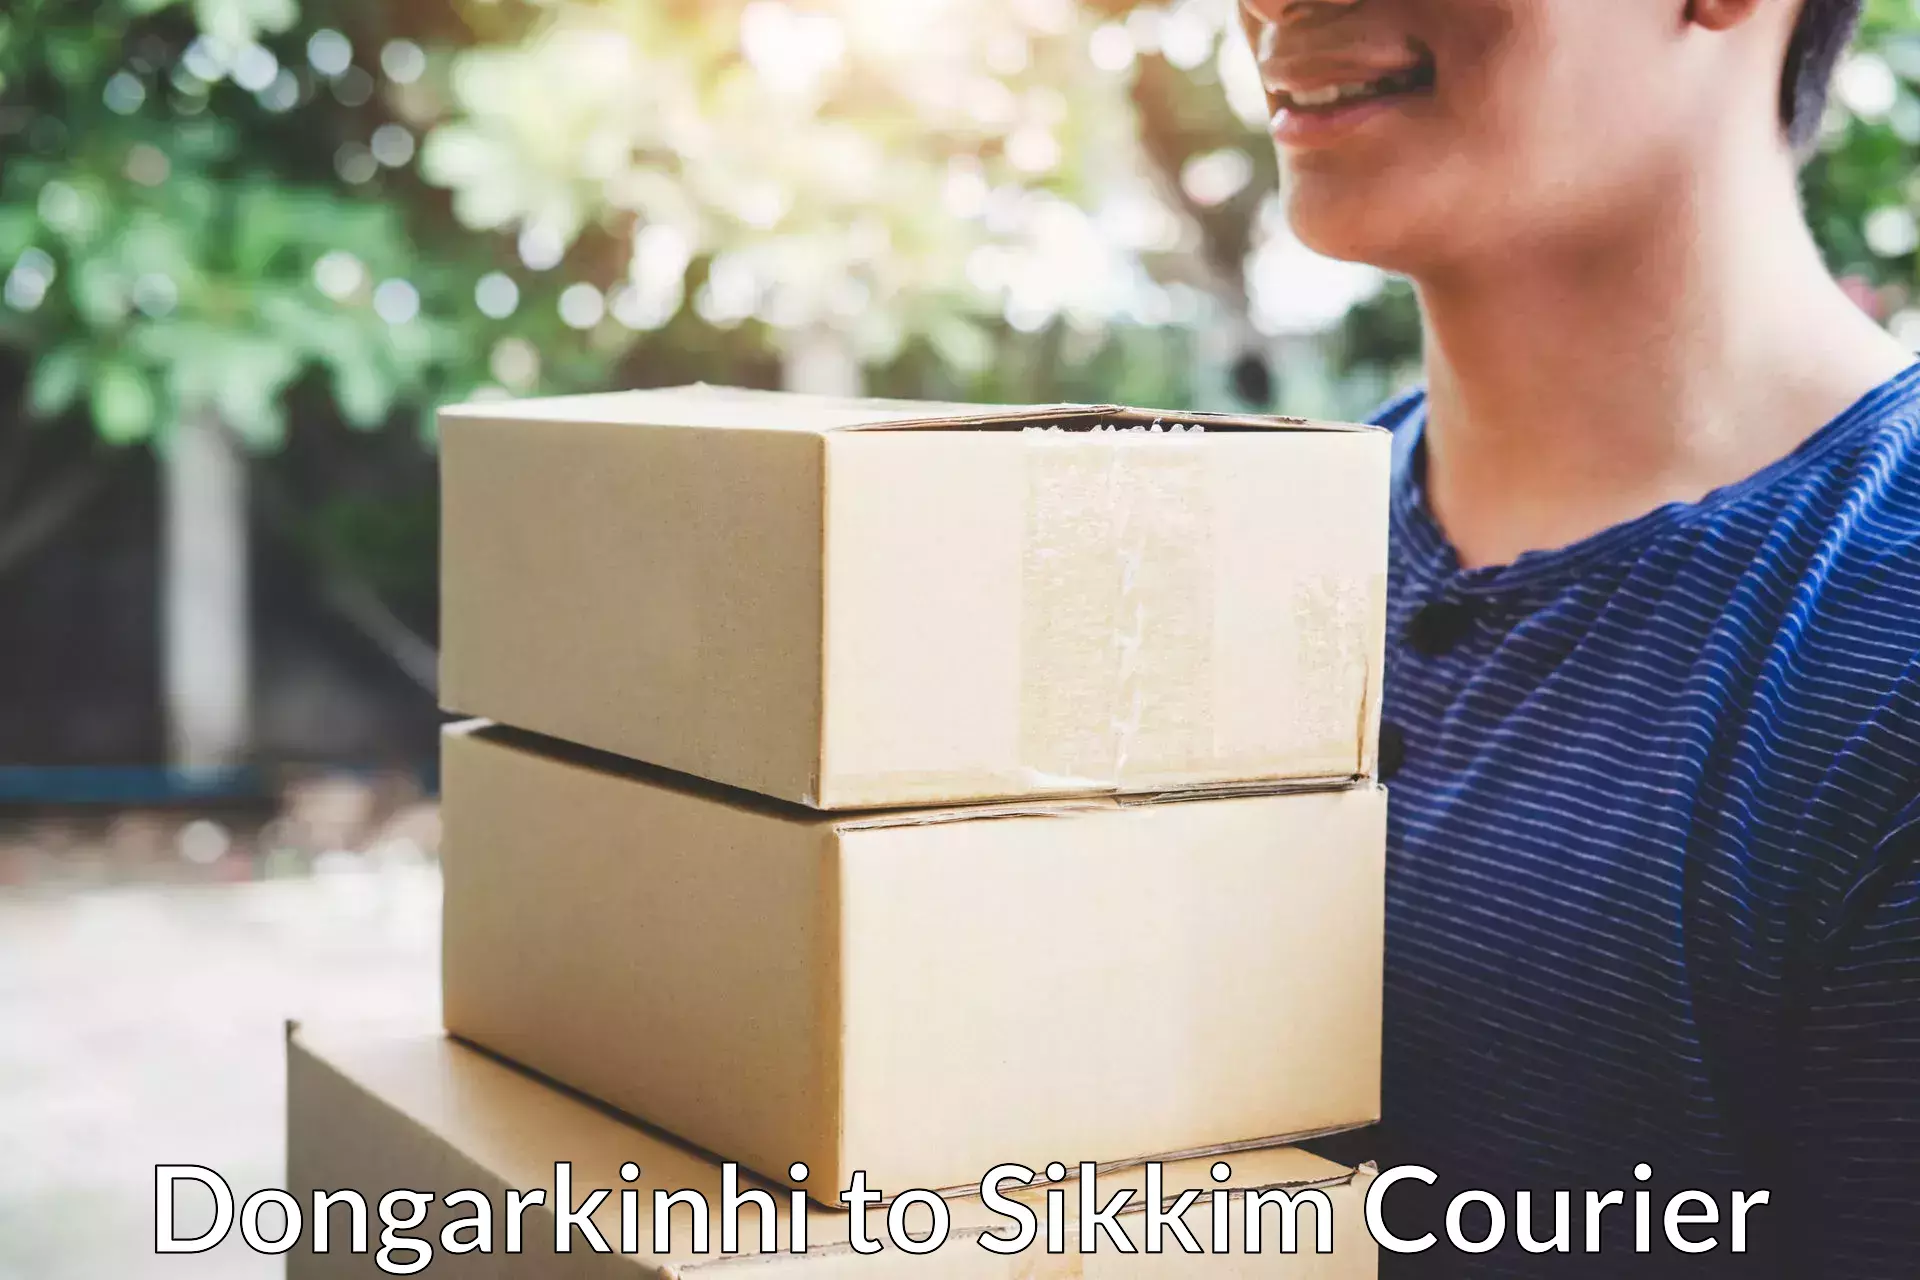 Furniture delivery service Dongarkinhi to North Sikkim